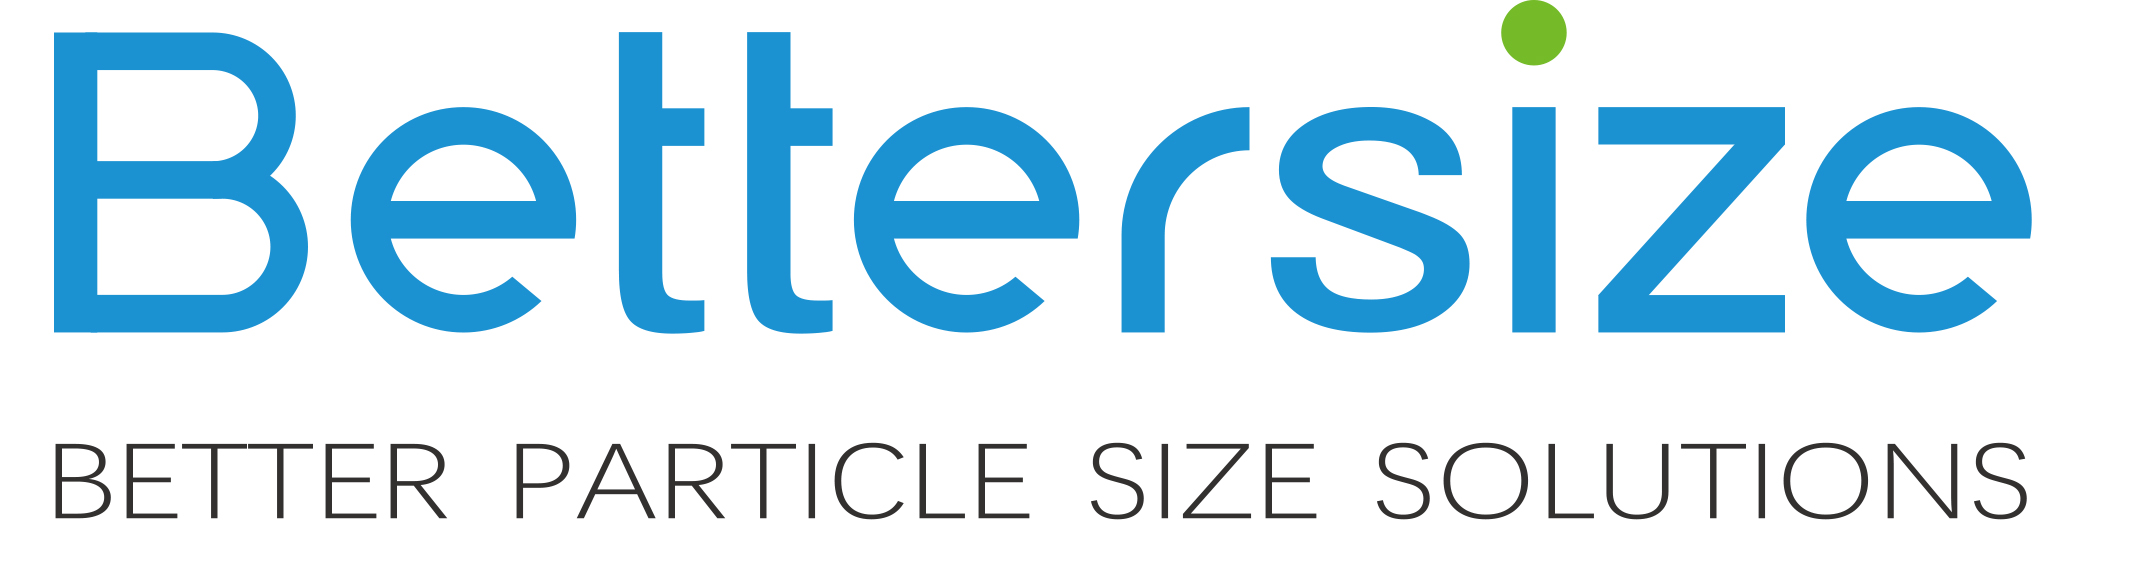 Bettersize logo with the tagline 